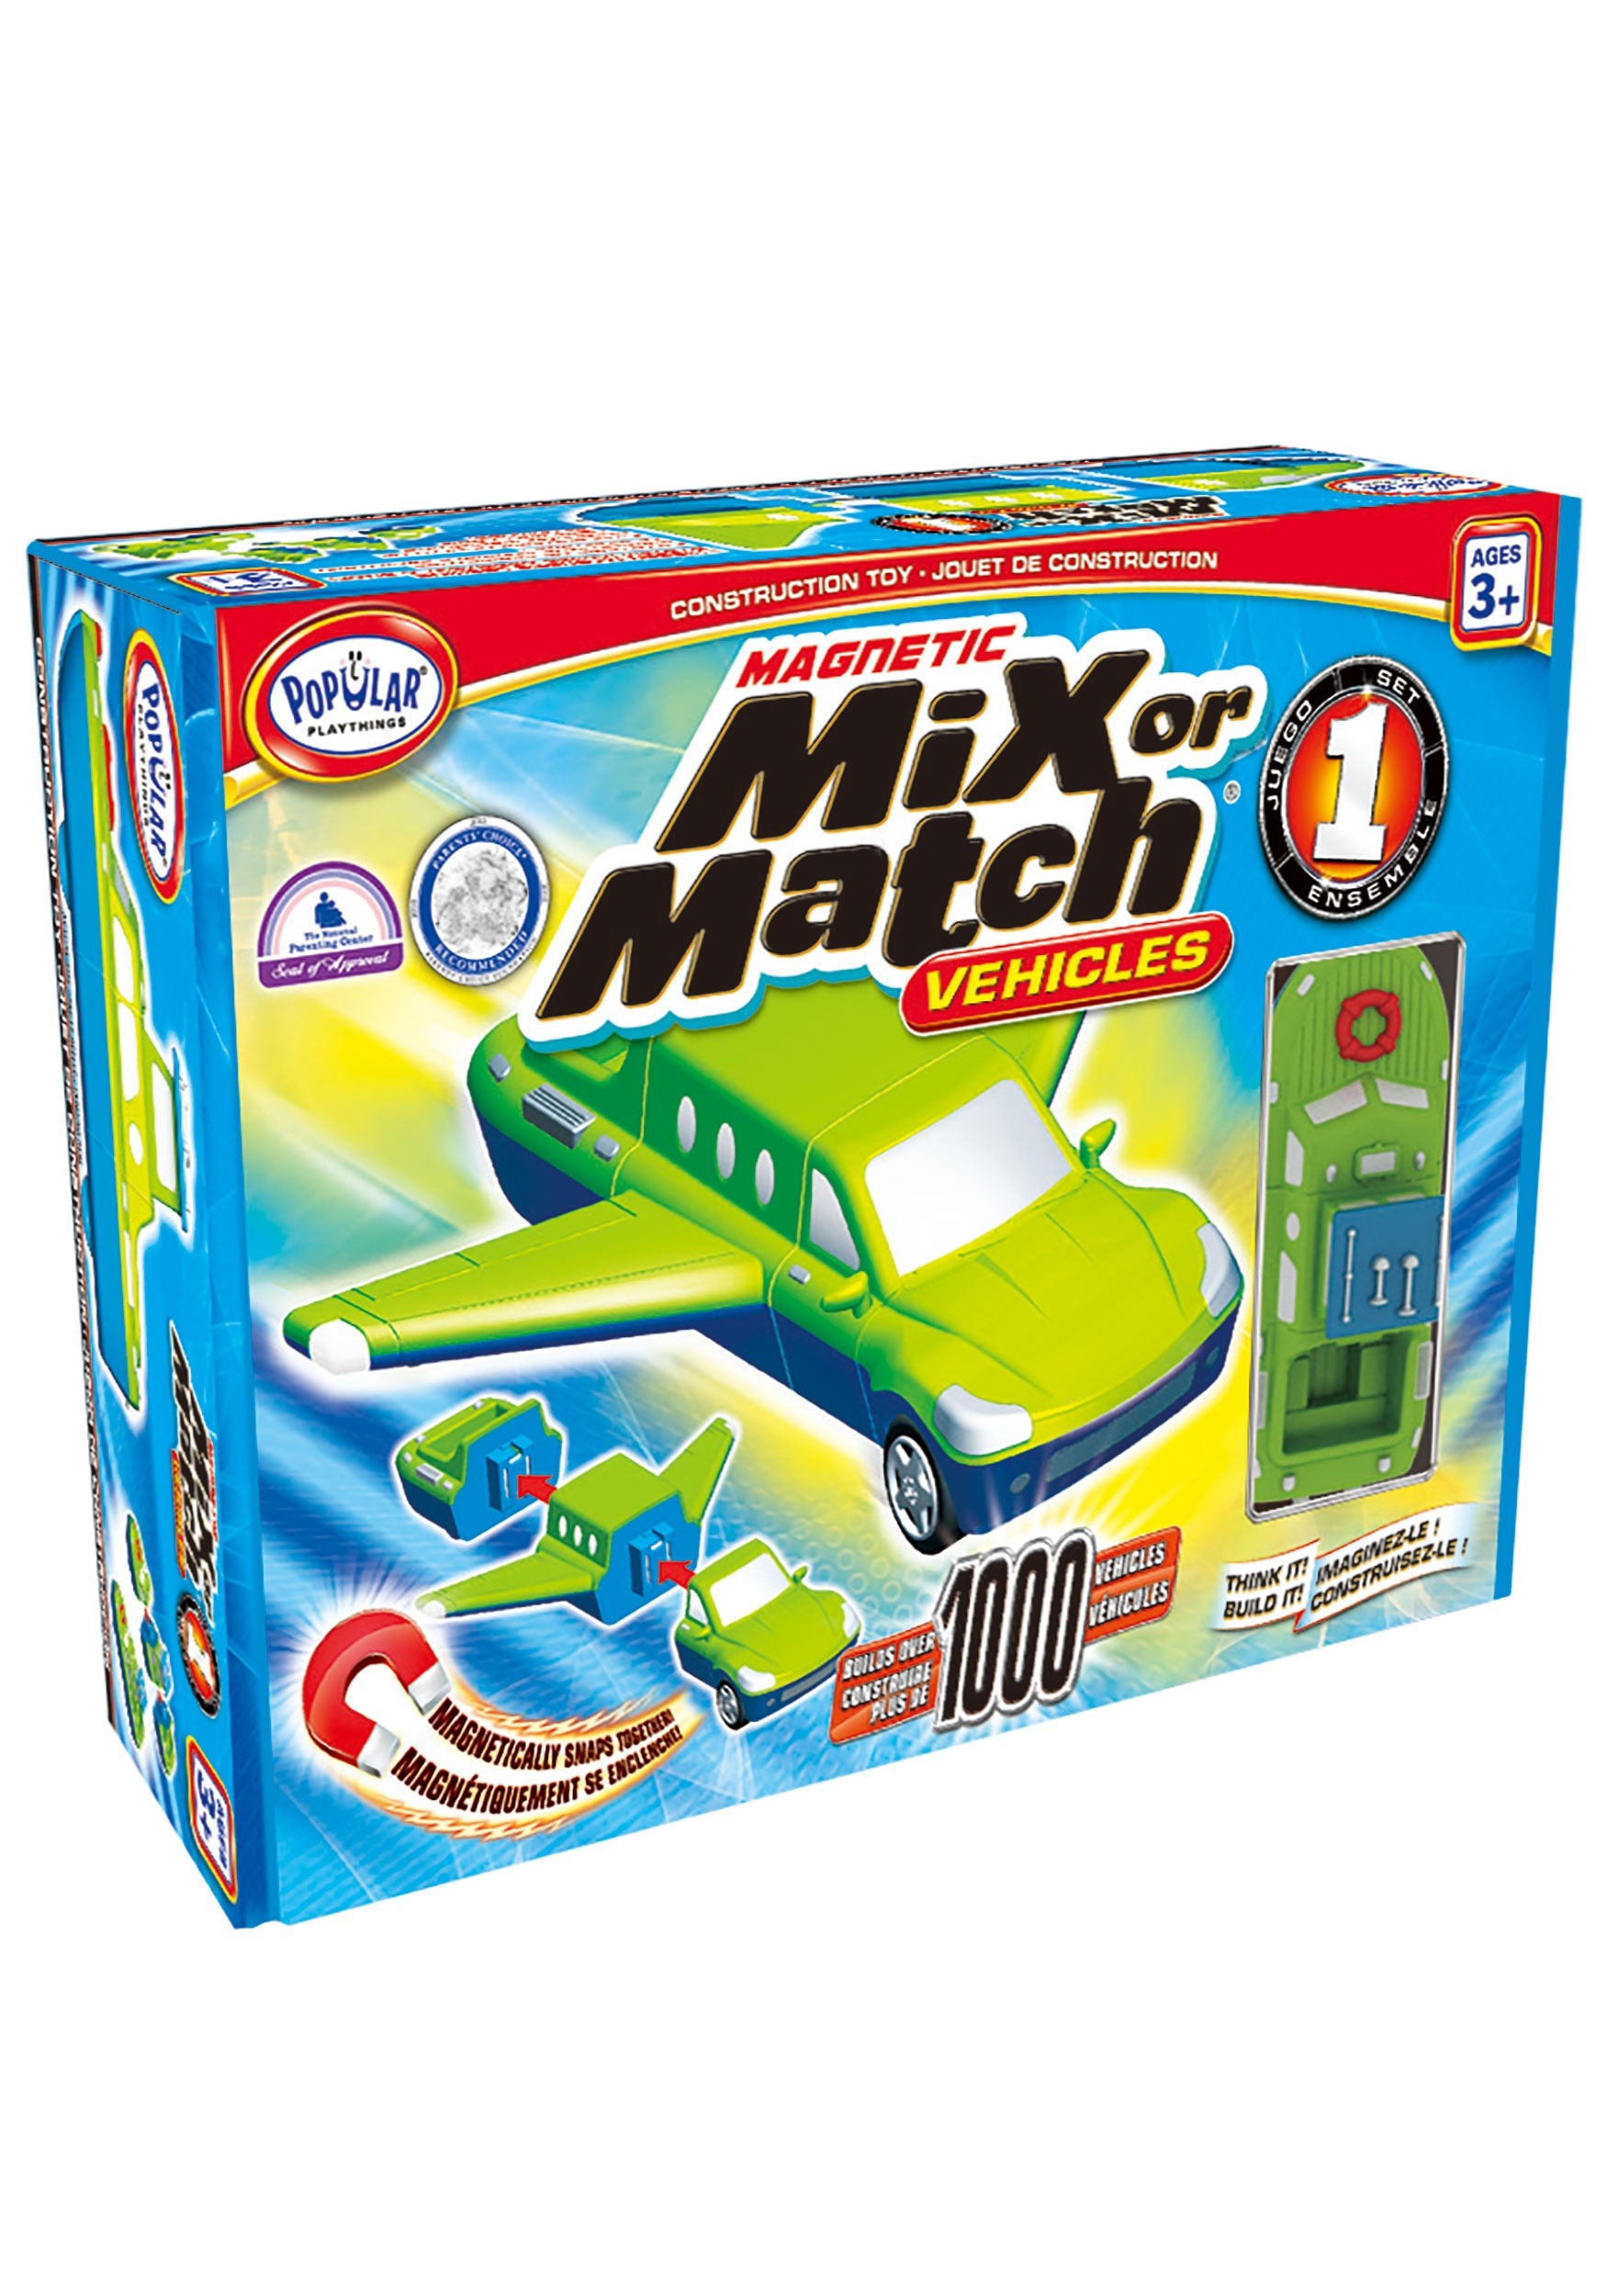 Mix or Match Magnetic Vehicles